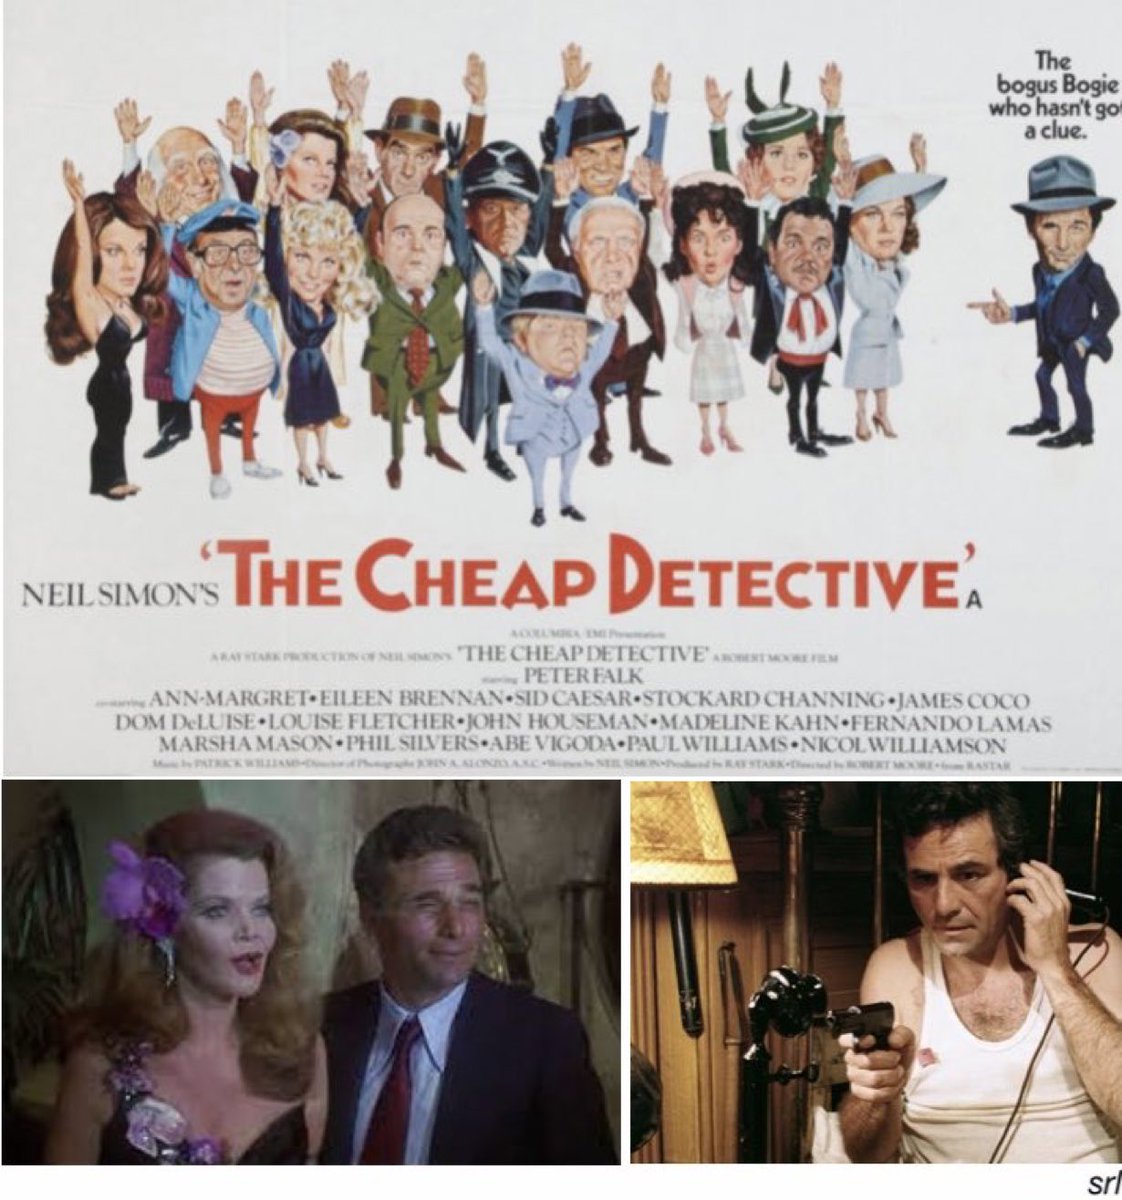 9:05pm TODAY on @TalkingPicsTV 

The 1978 #Crime #Mystery #Comedy film🎥 “The Cheap Detective” directed by #RobertMoore & written by #NeilSimon

🌟#PeterFalk #MadelineKahn #LouiseFletcher #AnnMargret #EileenBrennan #StockardChanning #DomDeLuise #SidCaesar #PhilSilvers